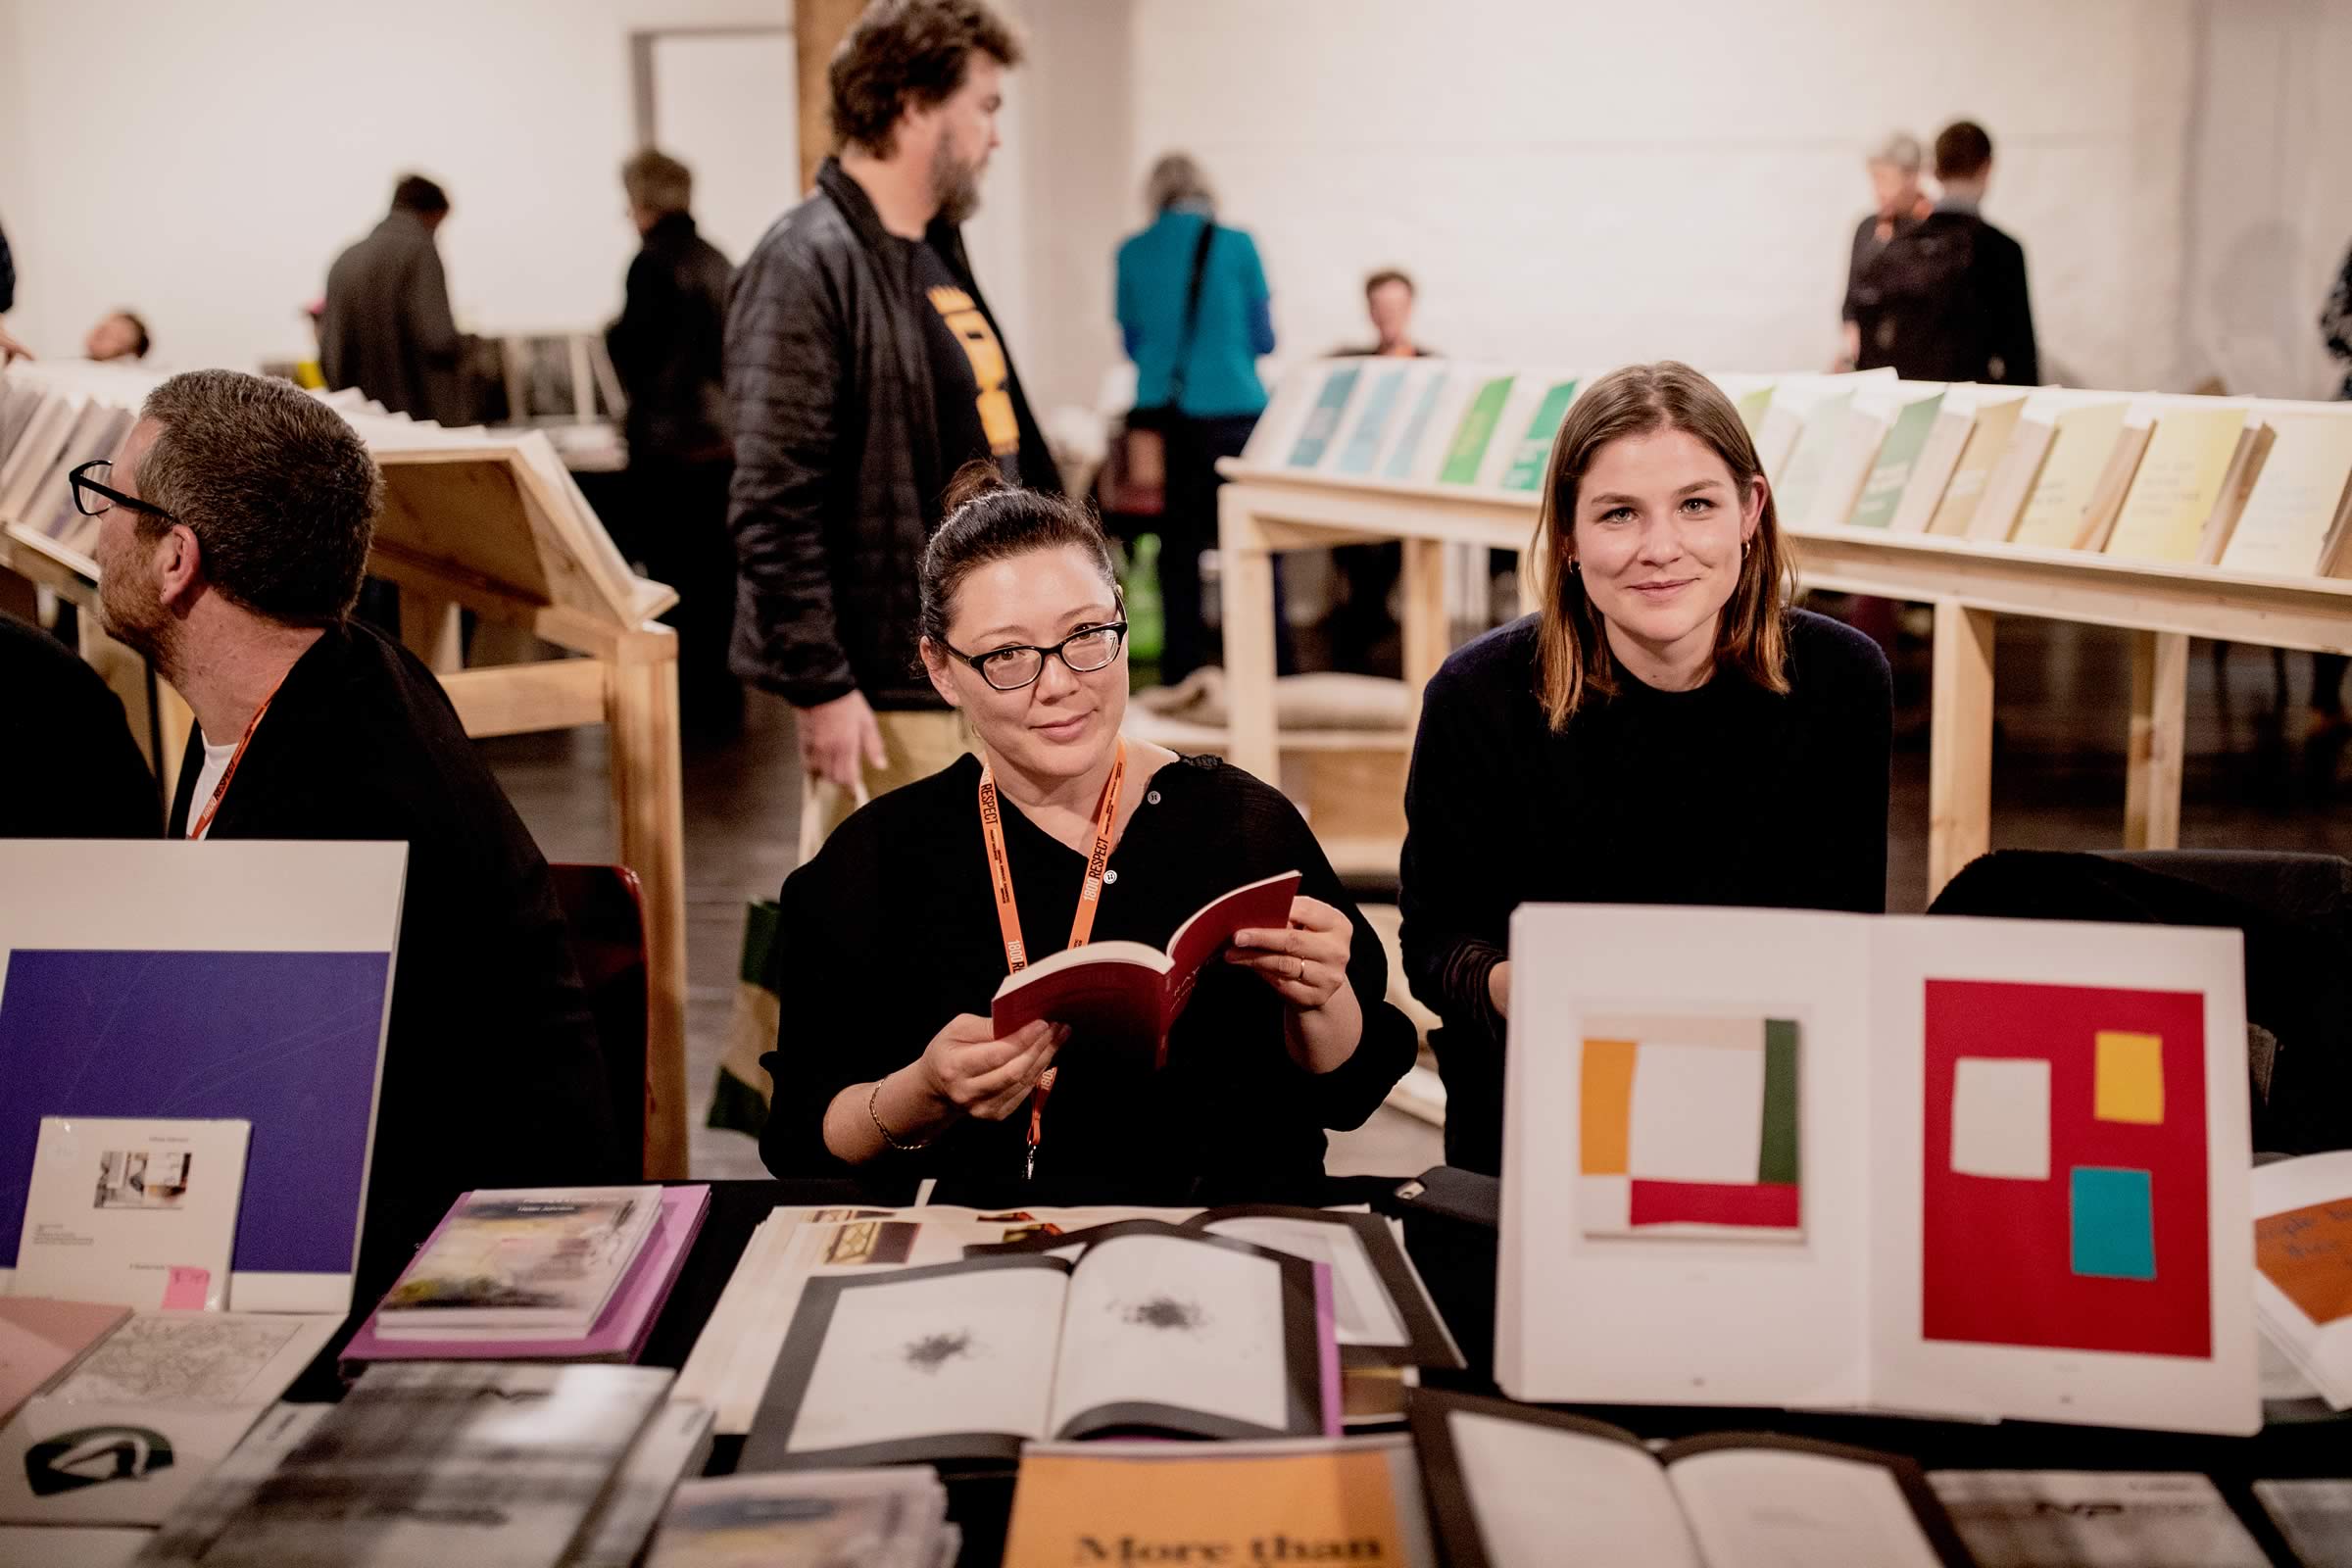 Photo of two smiling women stallholders seated behind a display of books. Photo: Rosie Hastie for The People’s Library 2018.